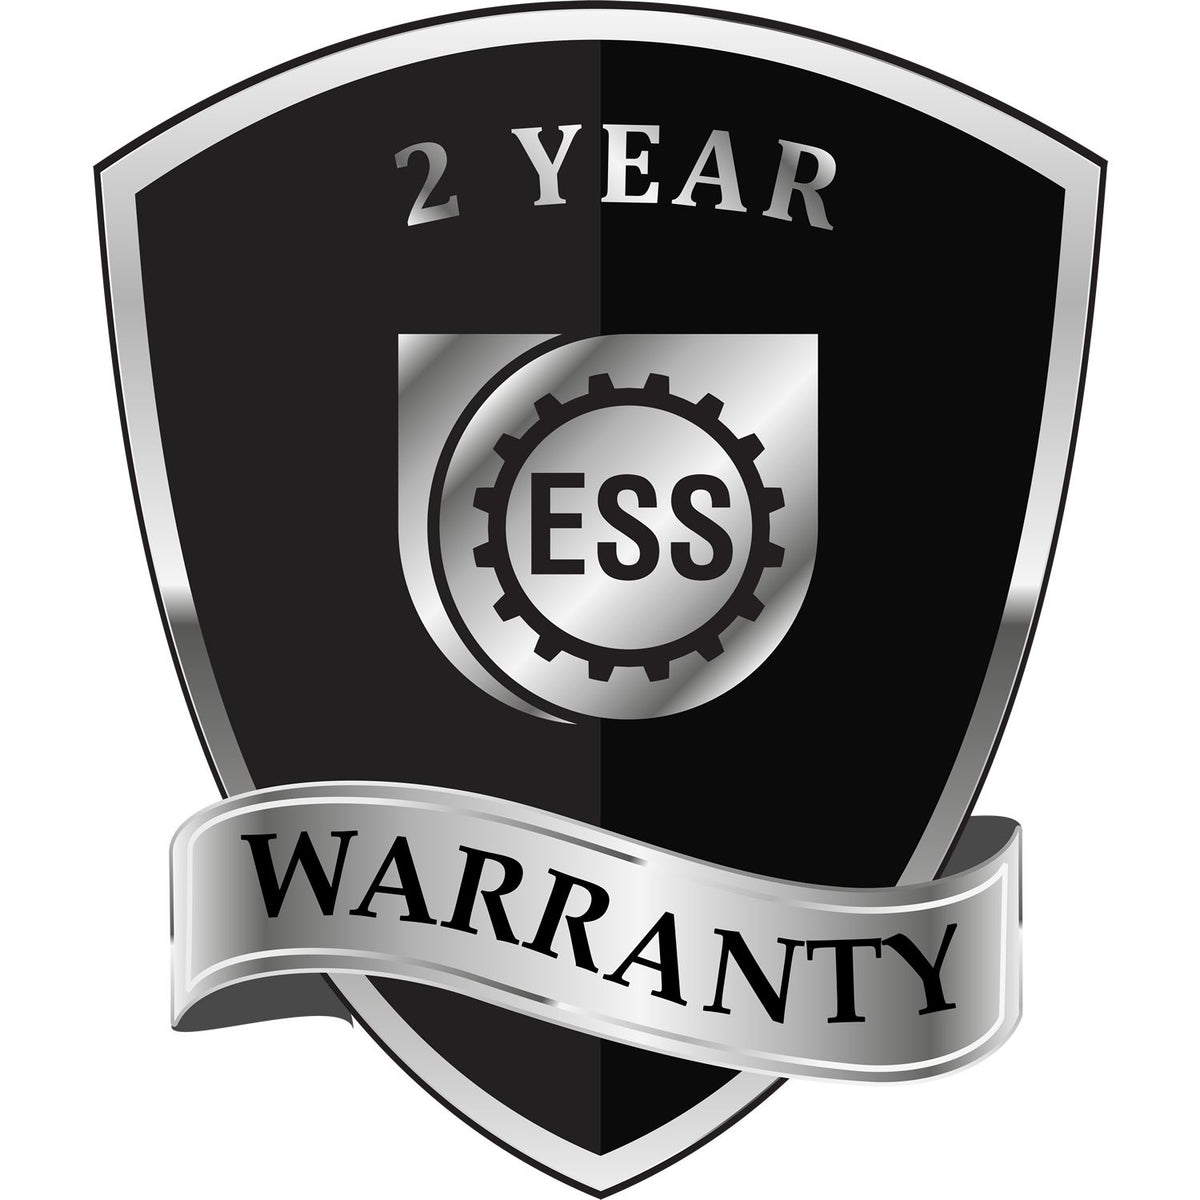 A badge or emblem showing a warranty icon for the Colorado Desk Architect Embossing Seal